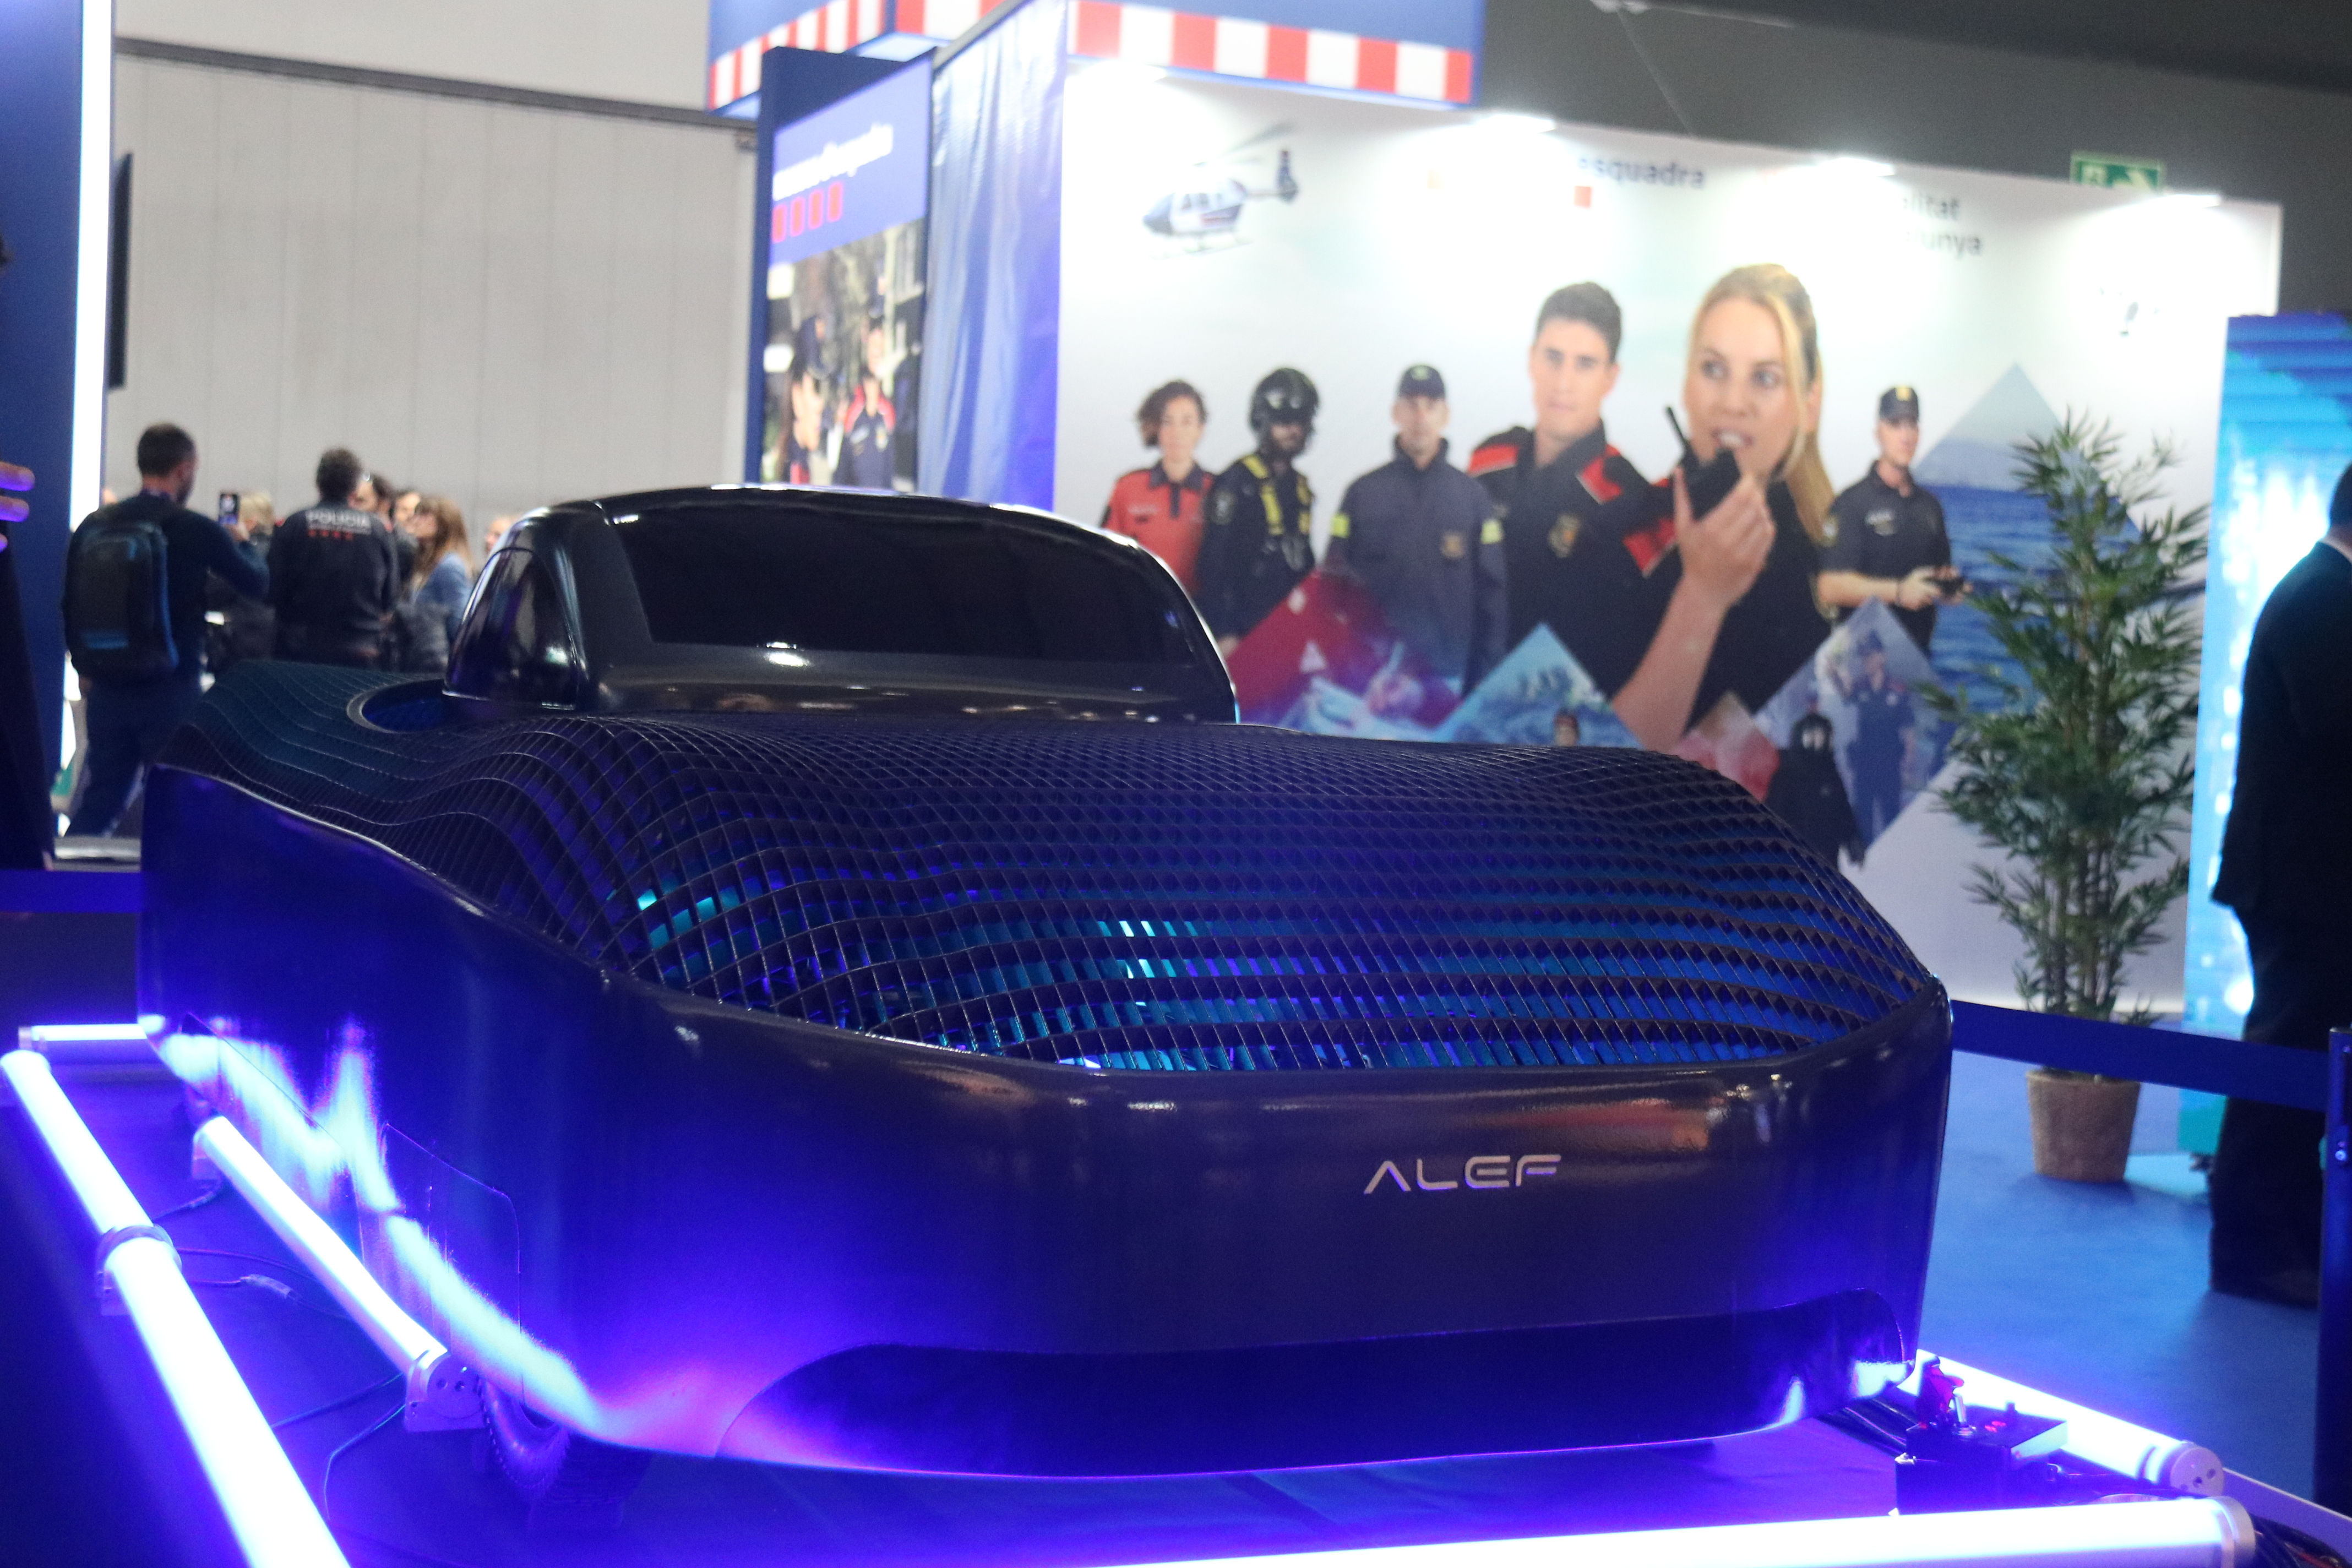 Alef's flying car prototype, exhibited at the Mobile World Congress